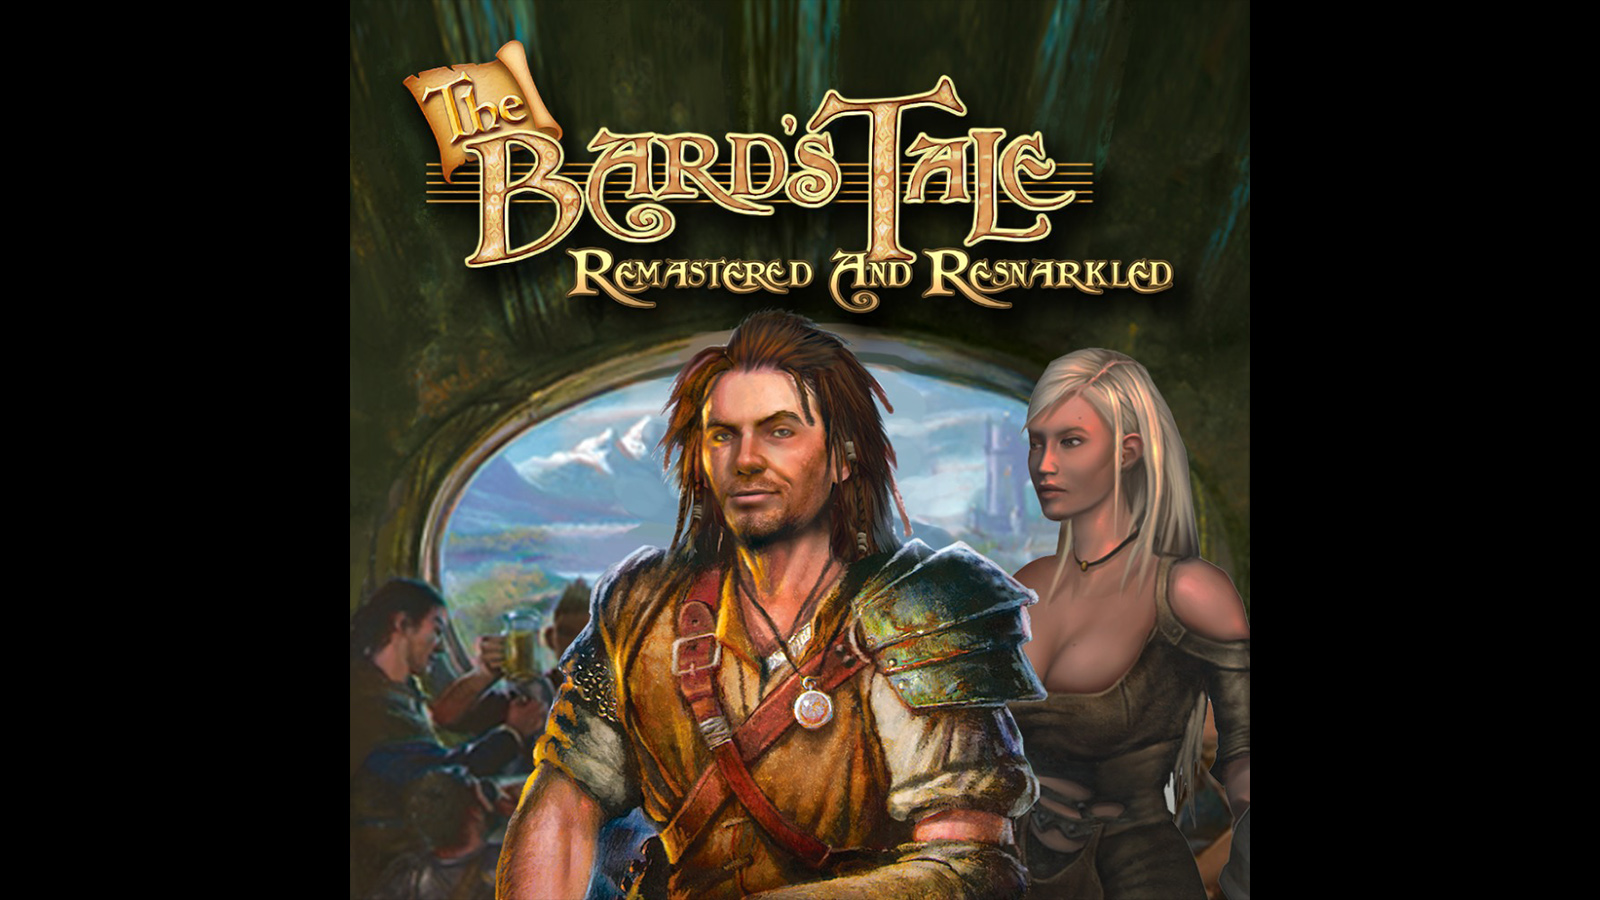 the-bards-tale-remastered-and-resnarkled-listingthumb-01-ps4-us-17aug17